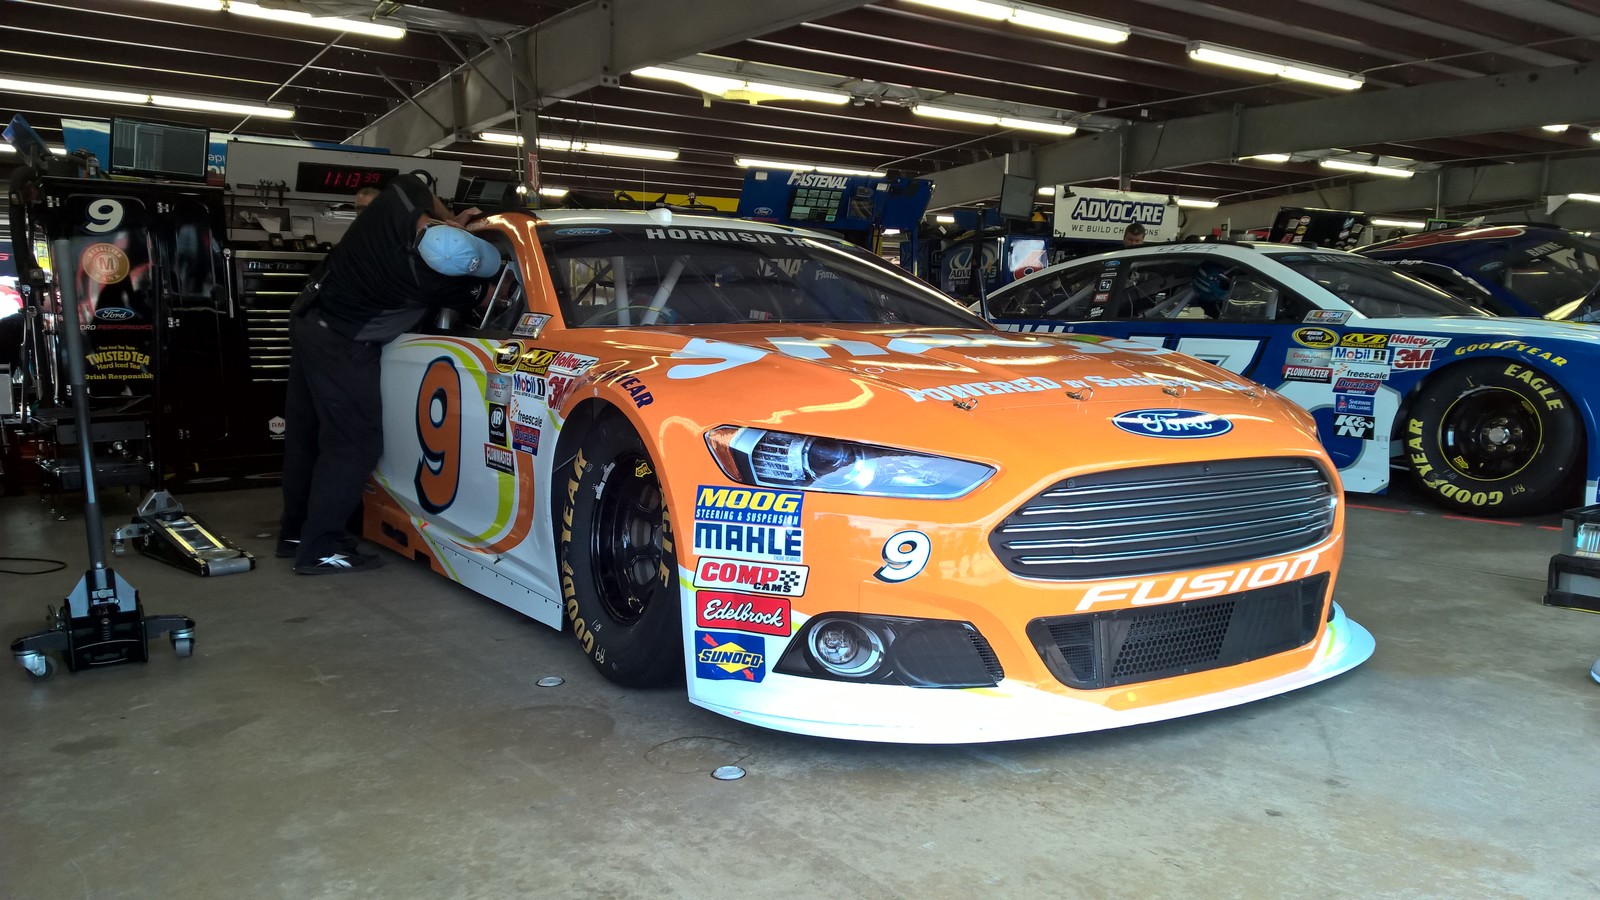 The #9 Shaw's Supermarkets Ford Fusion awaiting a practice session at New Hampshire Motor Speedway on July 17th, 2015.